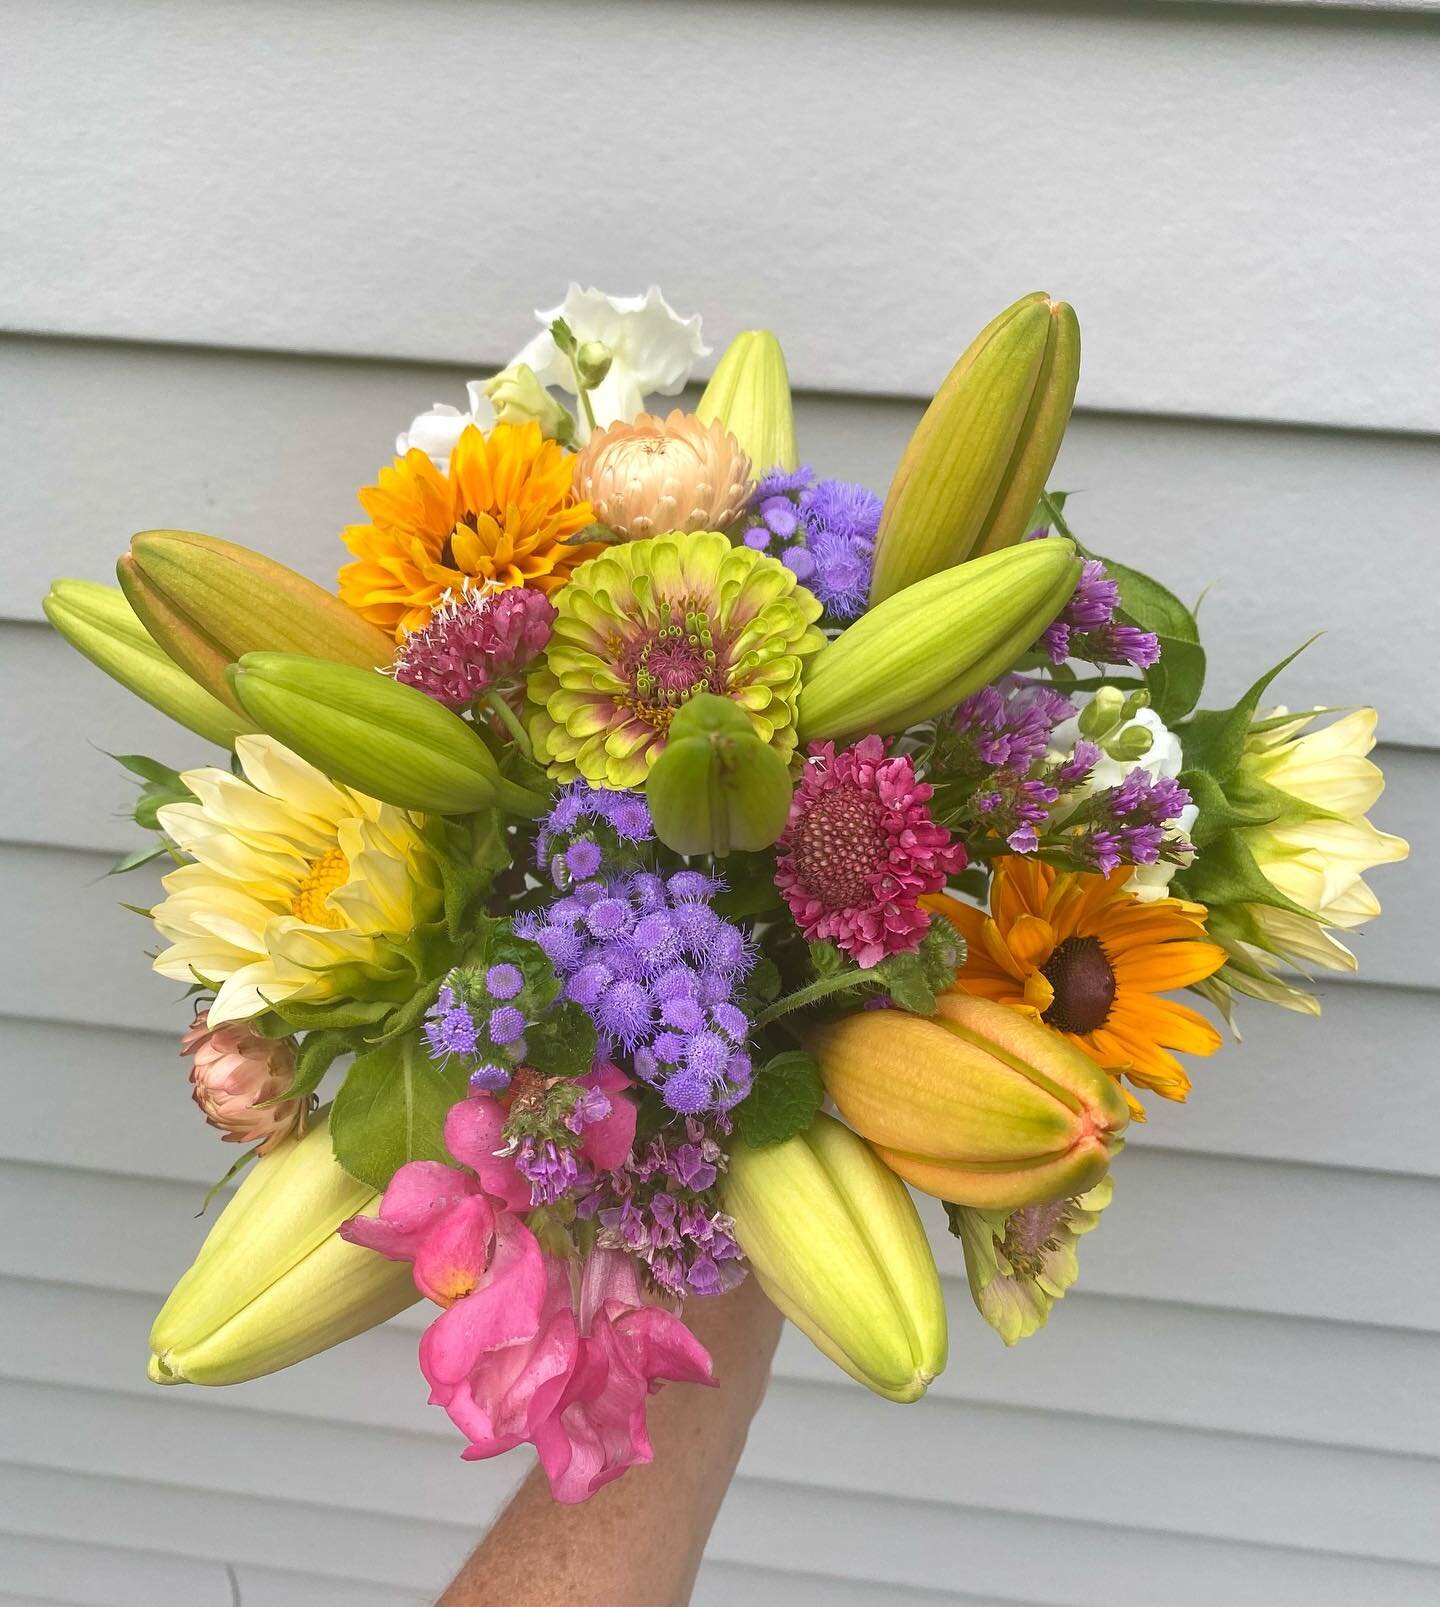 Our flowers are available today Sunday July 18th at The Flower Cart after 9:00 till sold out Sleepy Hollow Road North Stonington, CT and @denison_farmers_market from 12-3:00 120 Pequotsepos Road Mystic, CT. 
.
.
#bouquetofflowers #bouquets #farmersma